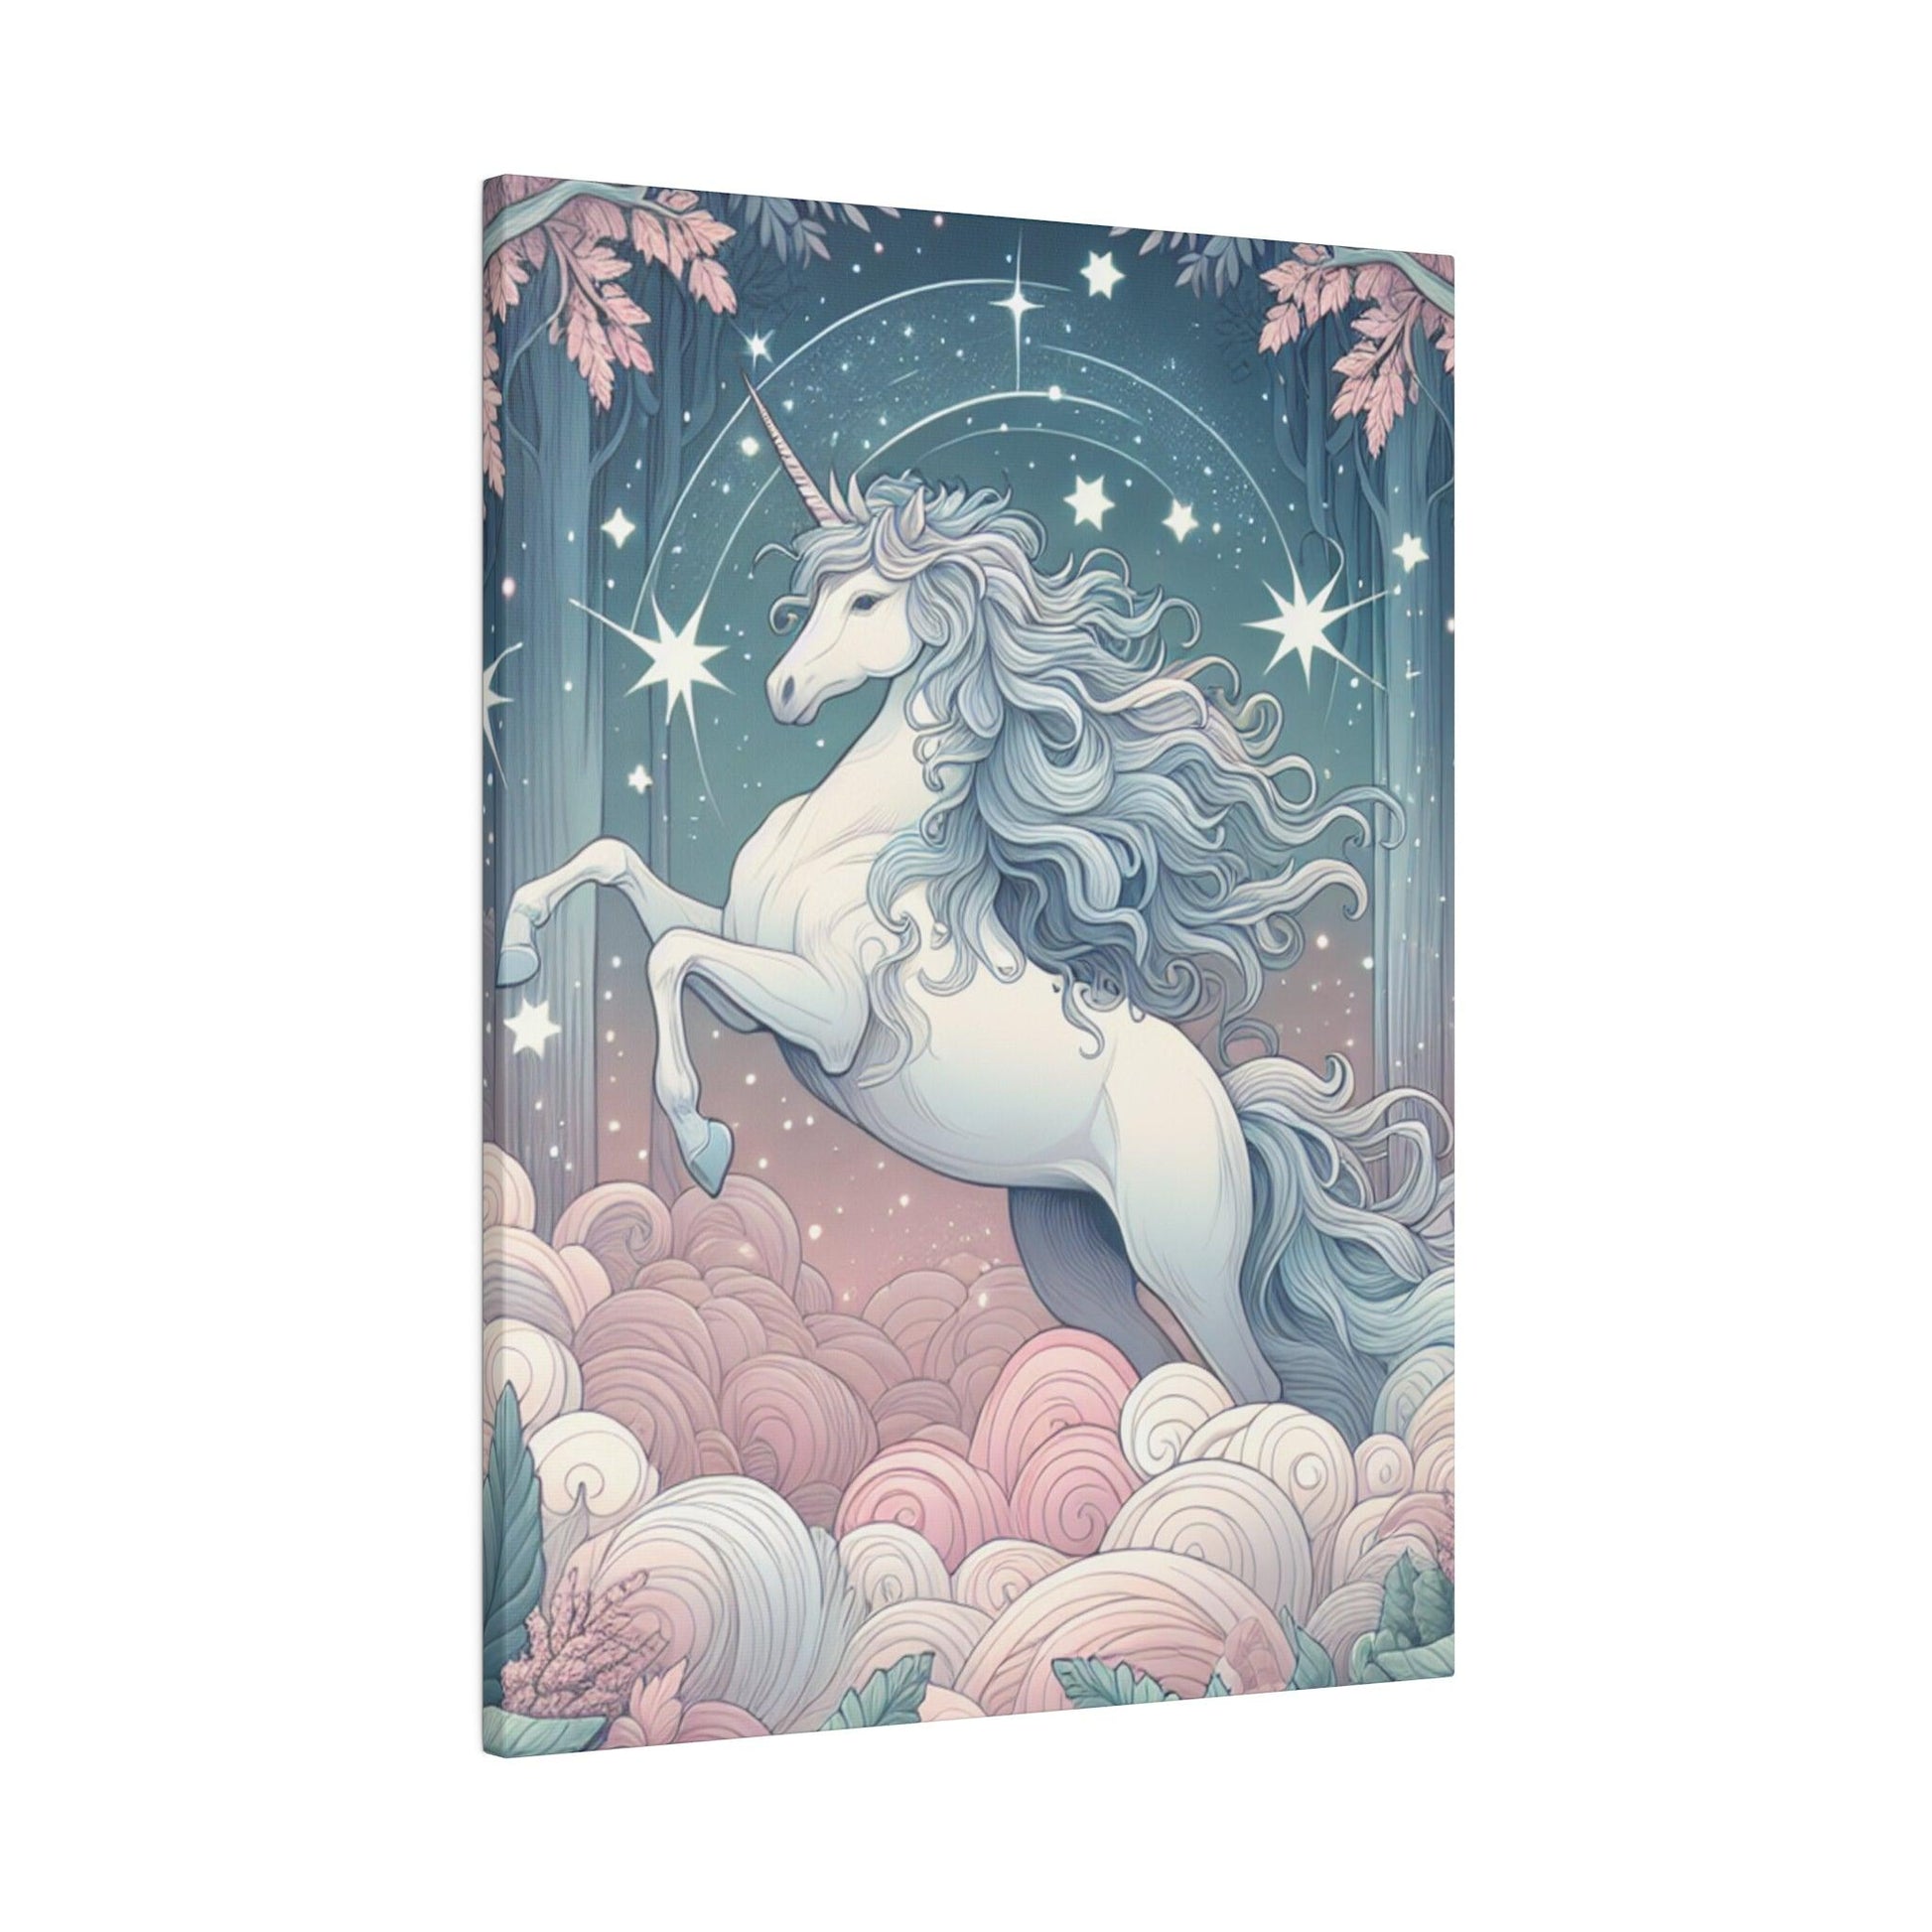 "Unicorn Whispers: Enchanting Canvas Wall Art" - Canvas - The Alice Gallery